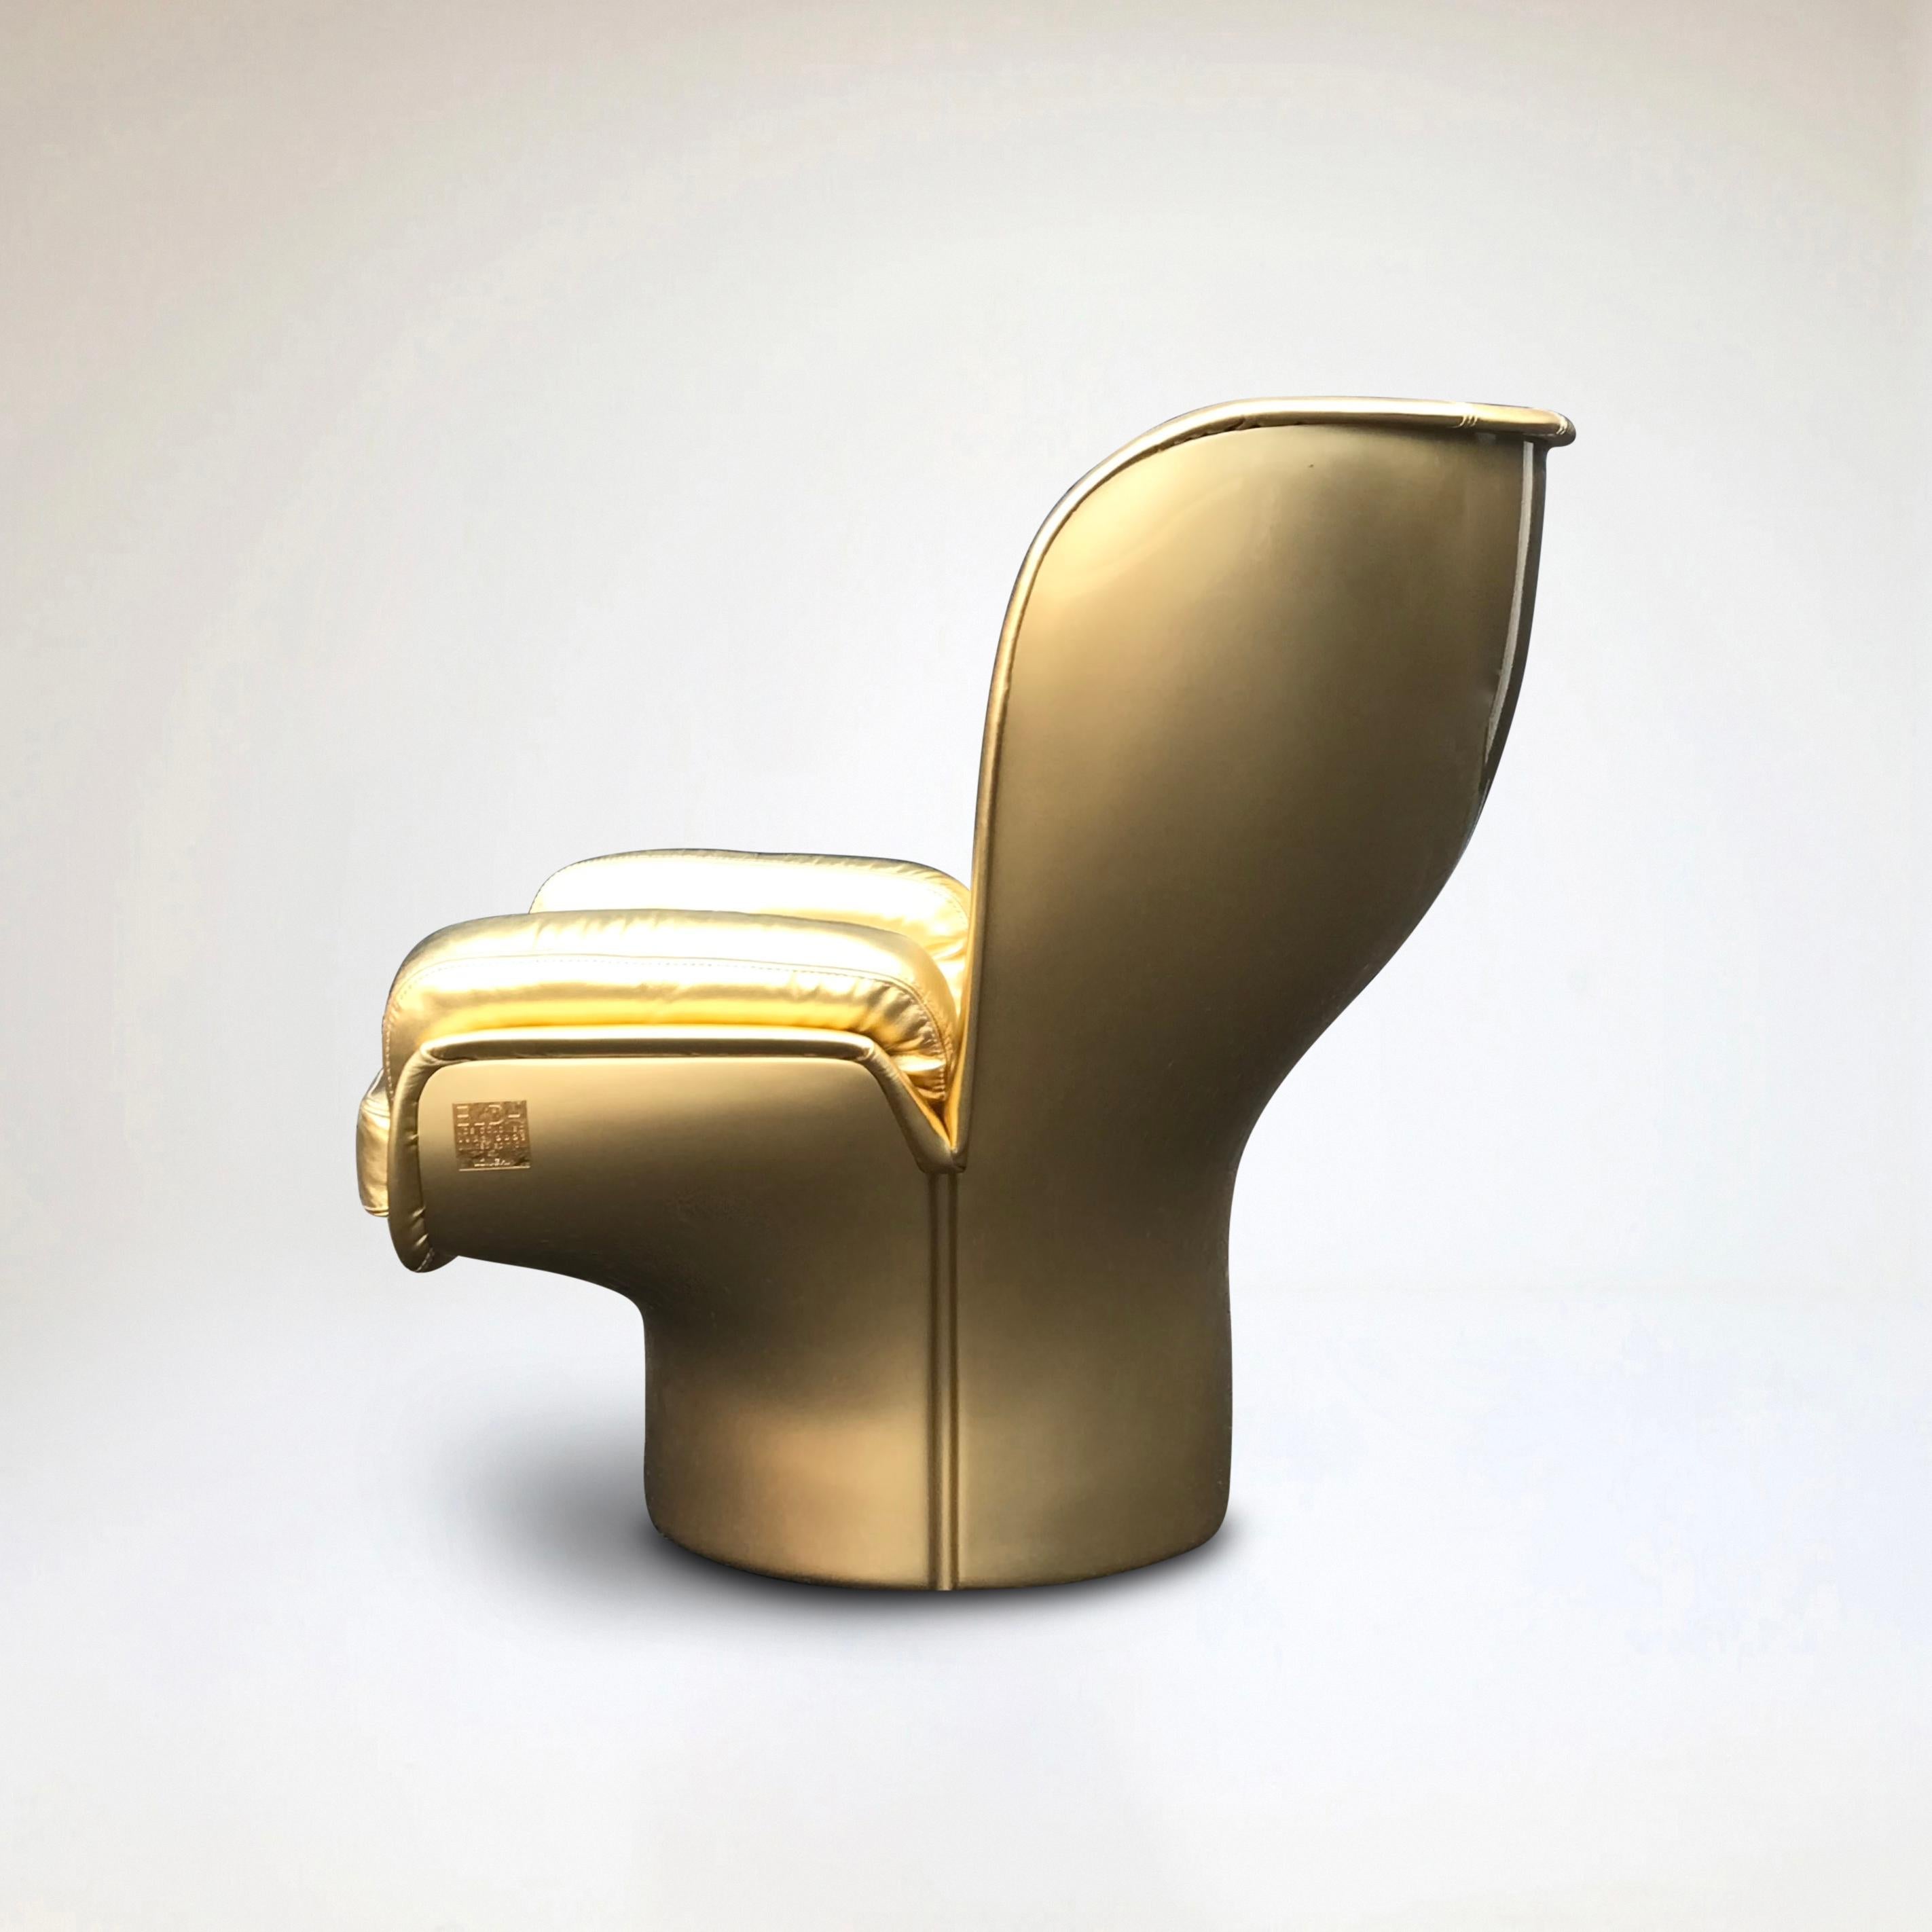 Space Age Golden Limited Edition Elda Chair by Joe Colombo for Longhi Italy no. 7/20 For Sale